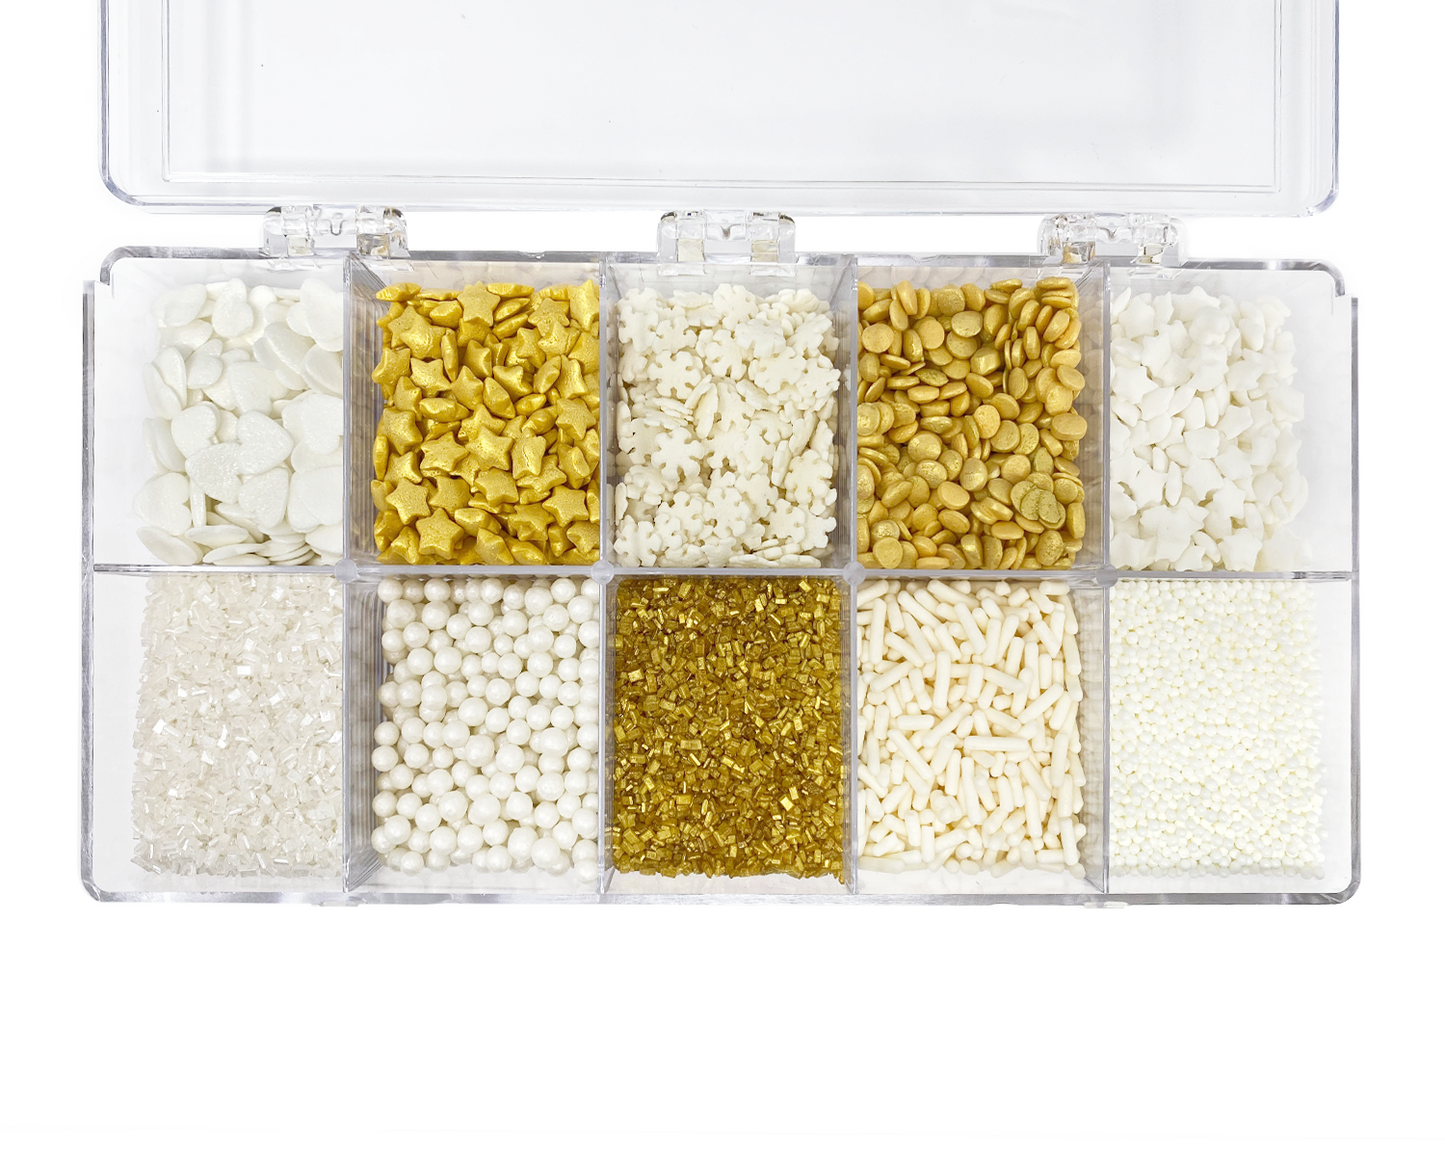 Dreaming of a White Christmas in Gold Sprinkle Decorating Kit 7 oz.